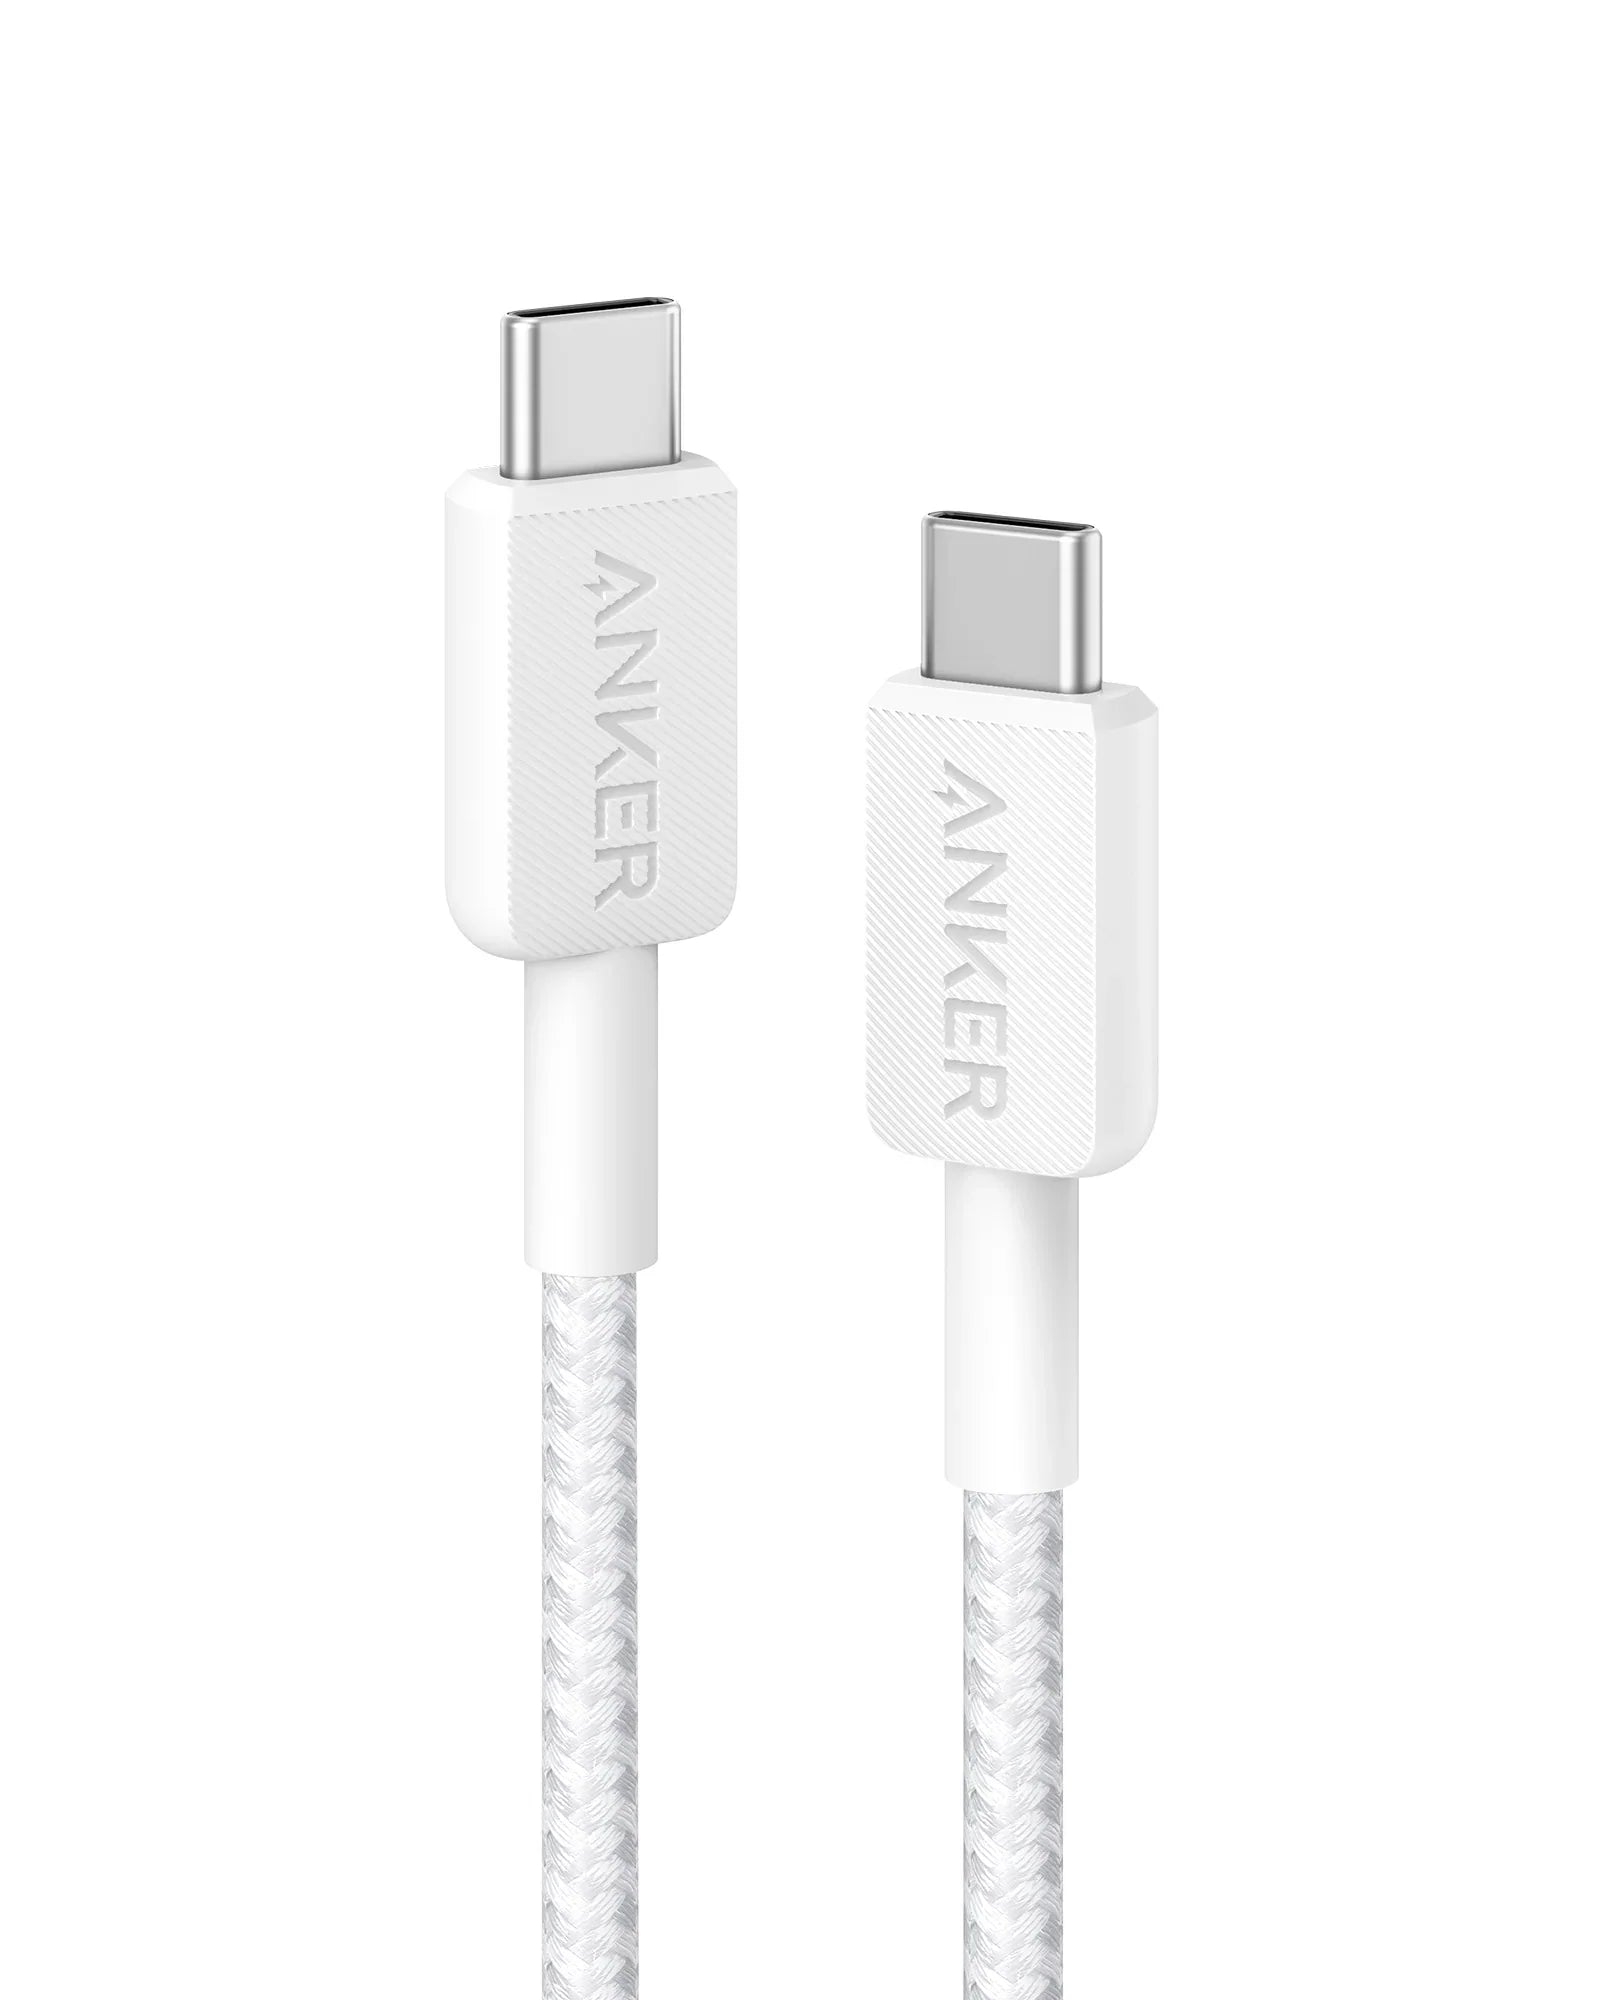 Anker 322 USB-C to USB-C Cable Three store